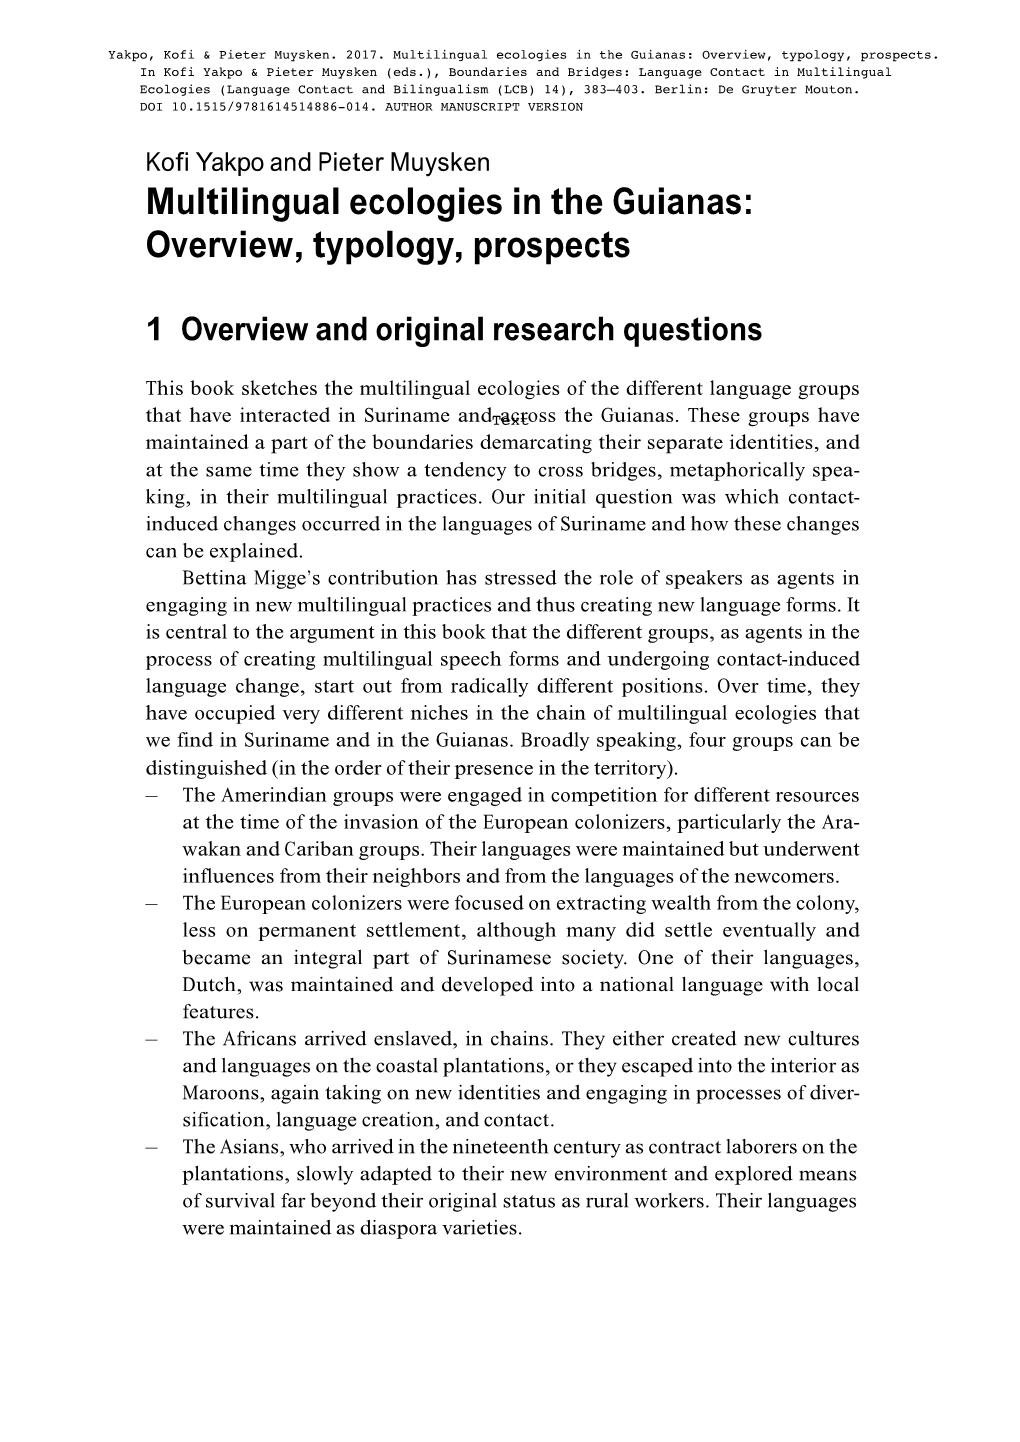 Multilingual Ecologies in the Guianas: Overview, Typology, Prospects